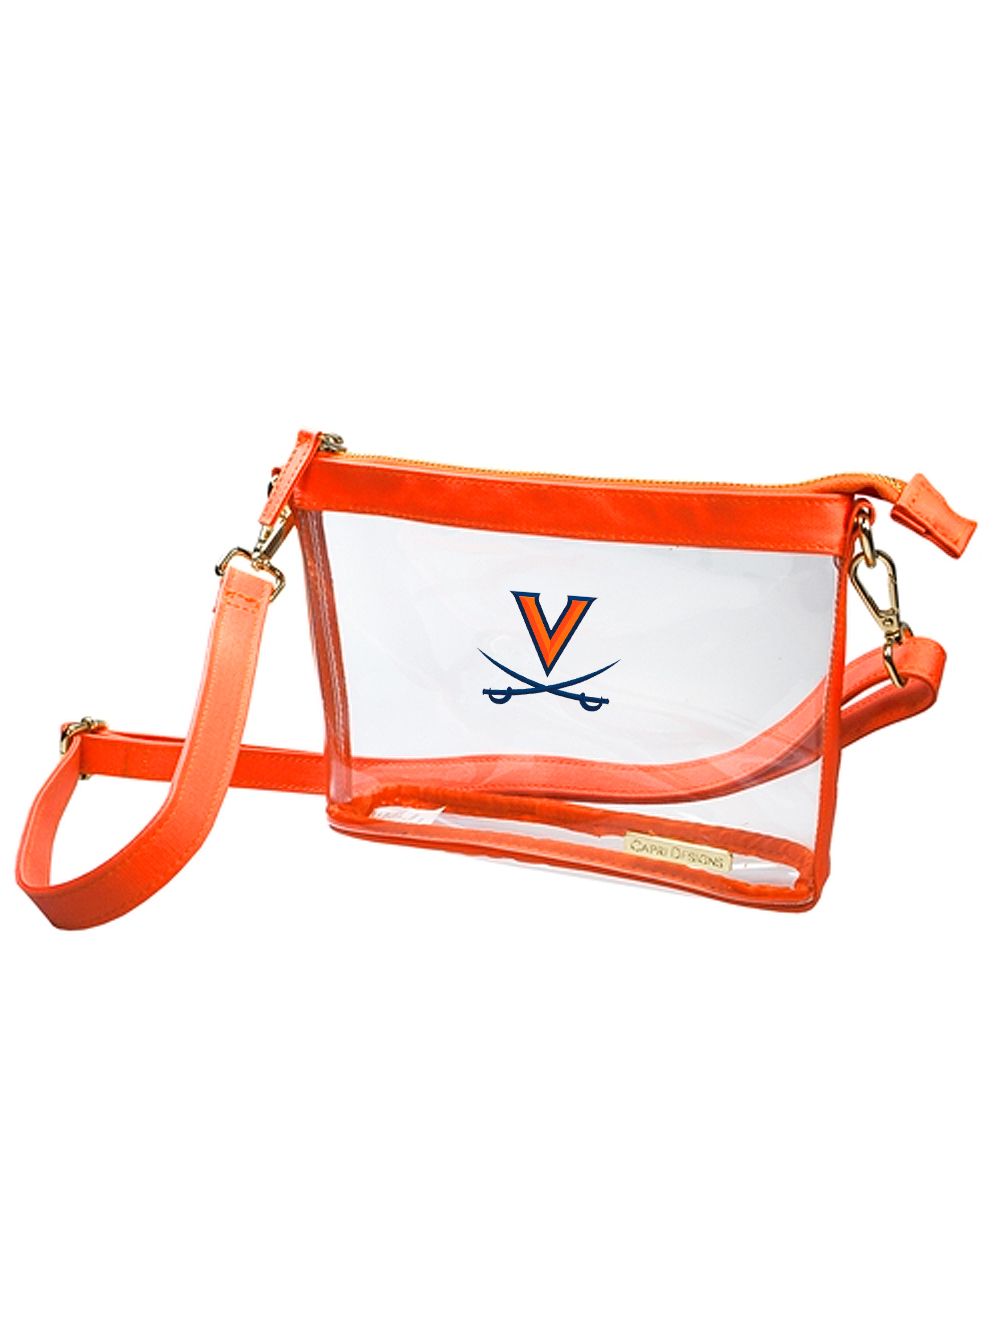 Orange Small Crossbody Clear Bag - Mincer's of Charlottesville